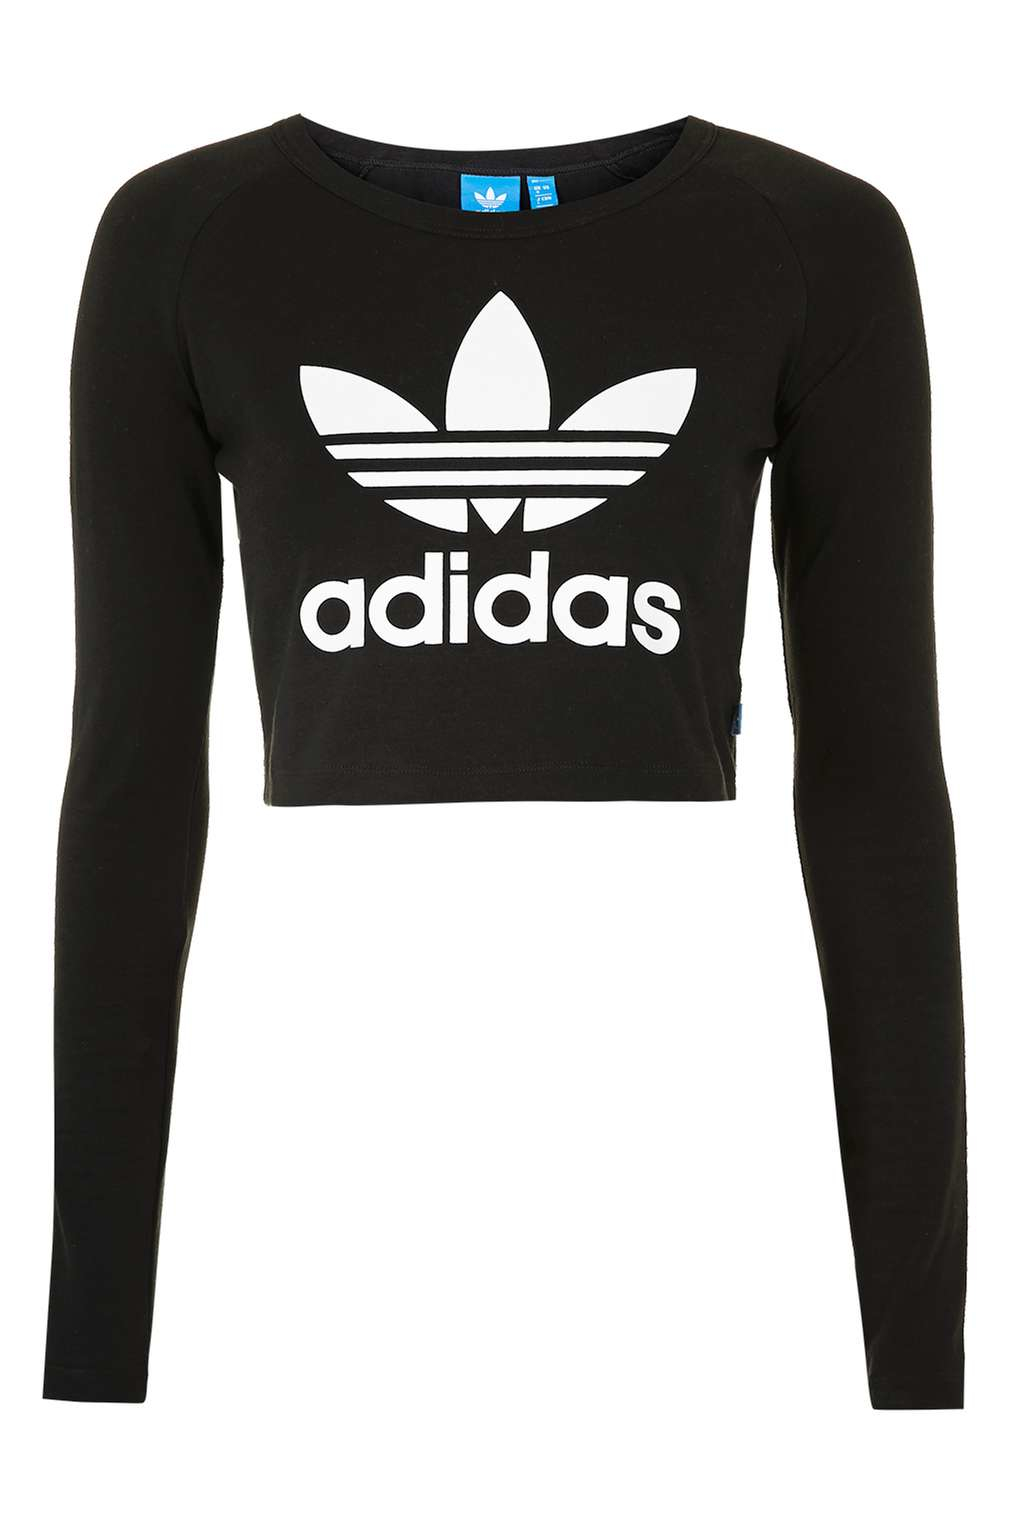 Topshop Cropped Long Sleeve Tee By Adidas Originals in Black | Lyst